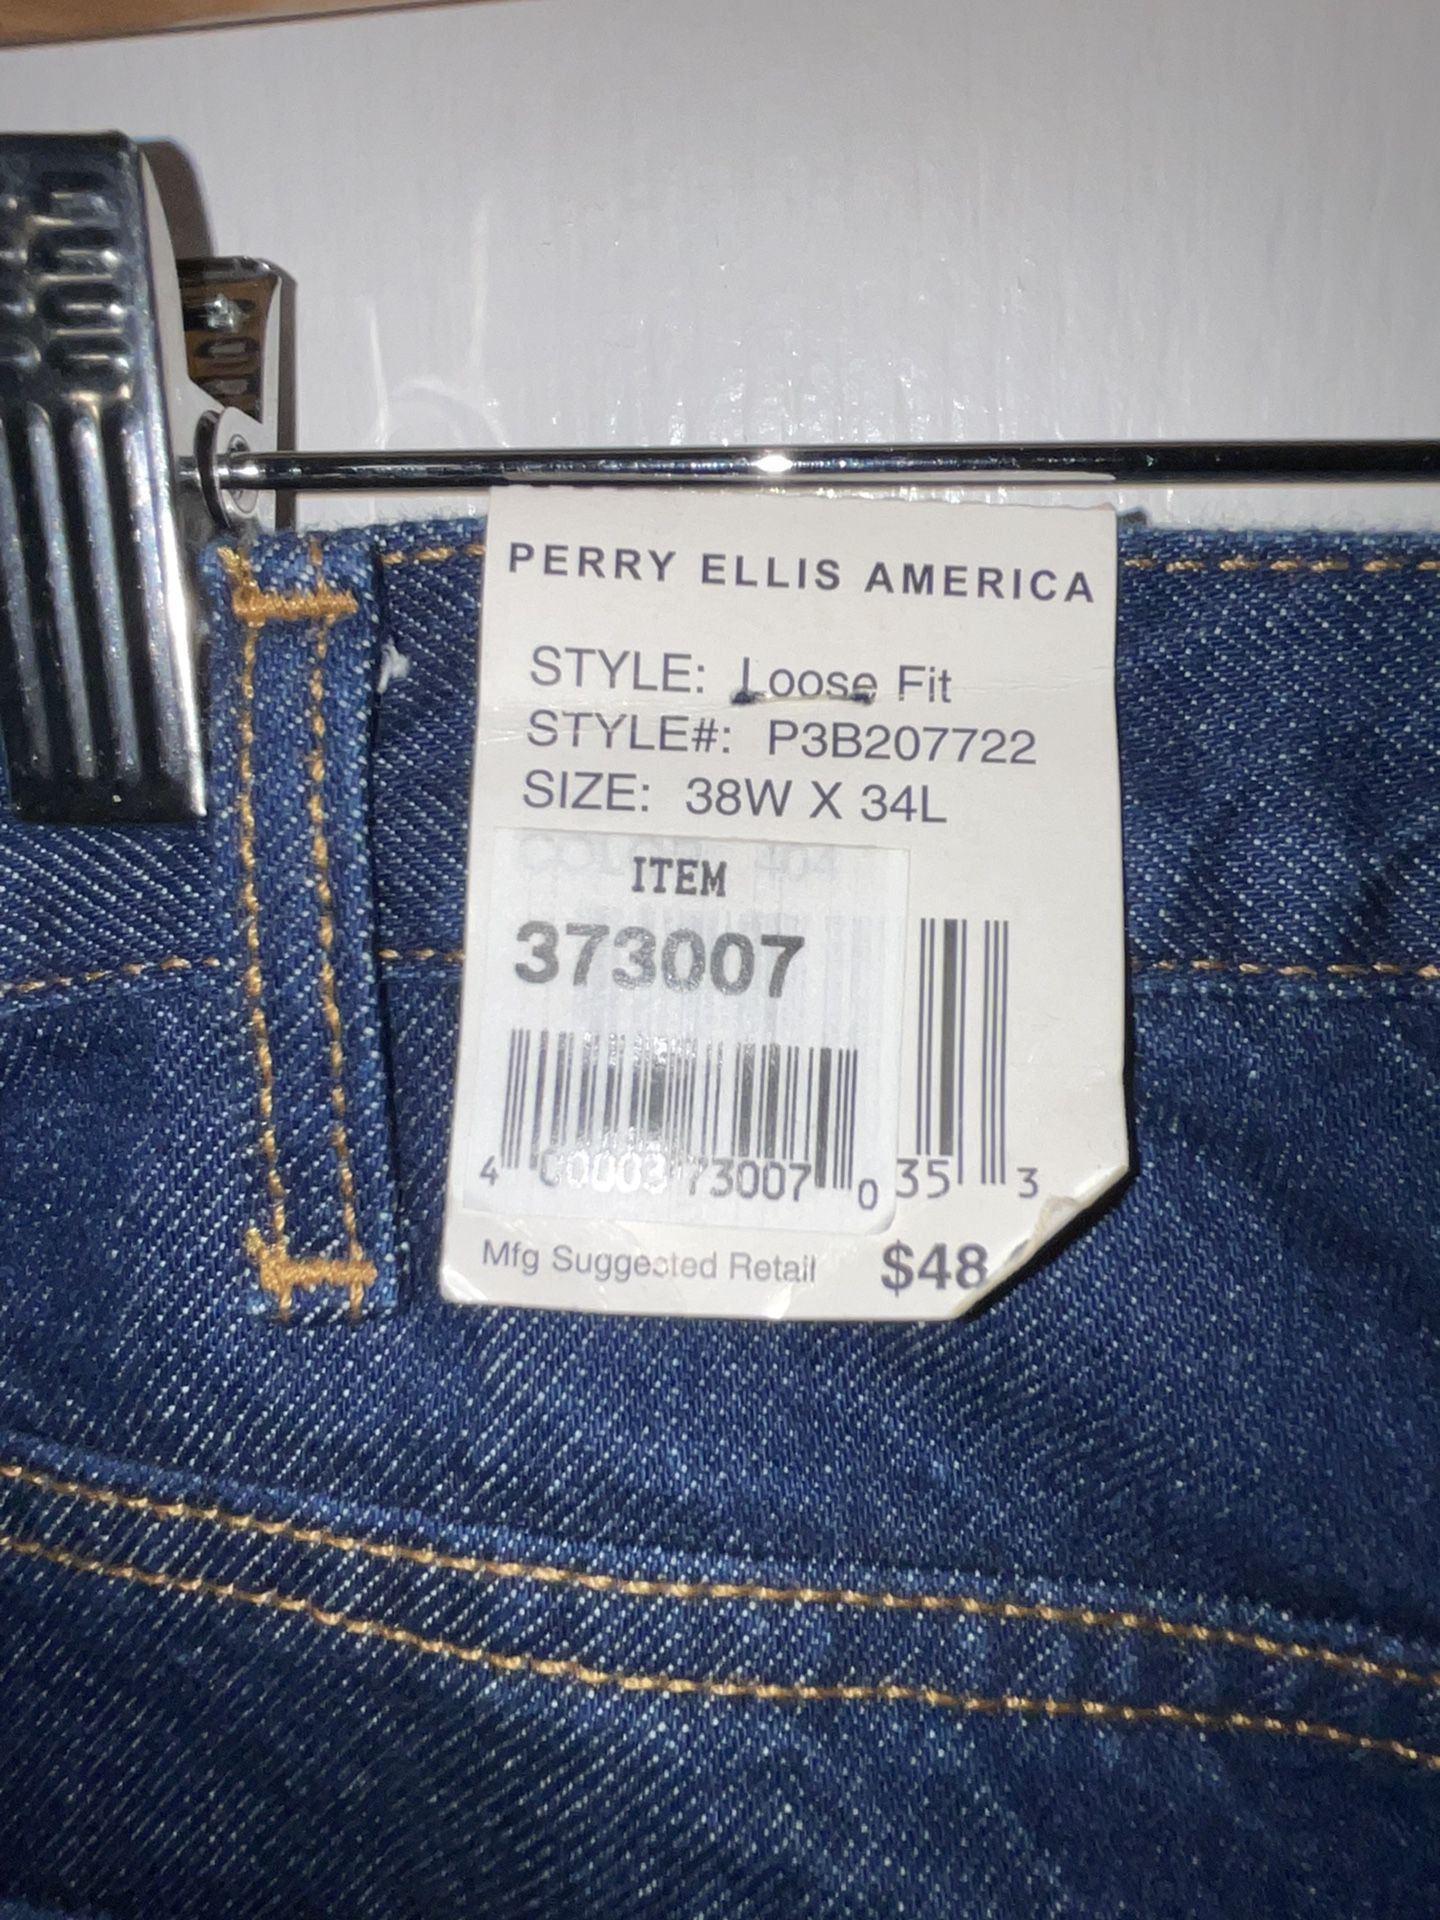 Perry Ellis America Jeans 38x34 NEW Loose Fit - Style P3B207722 New with tags